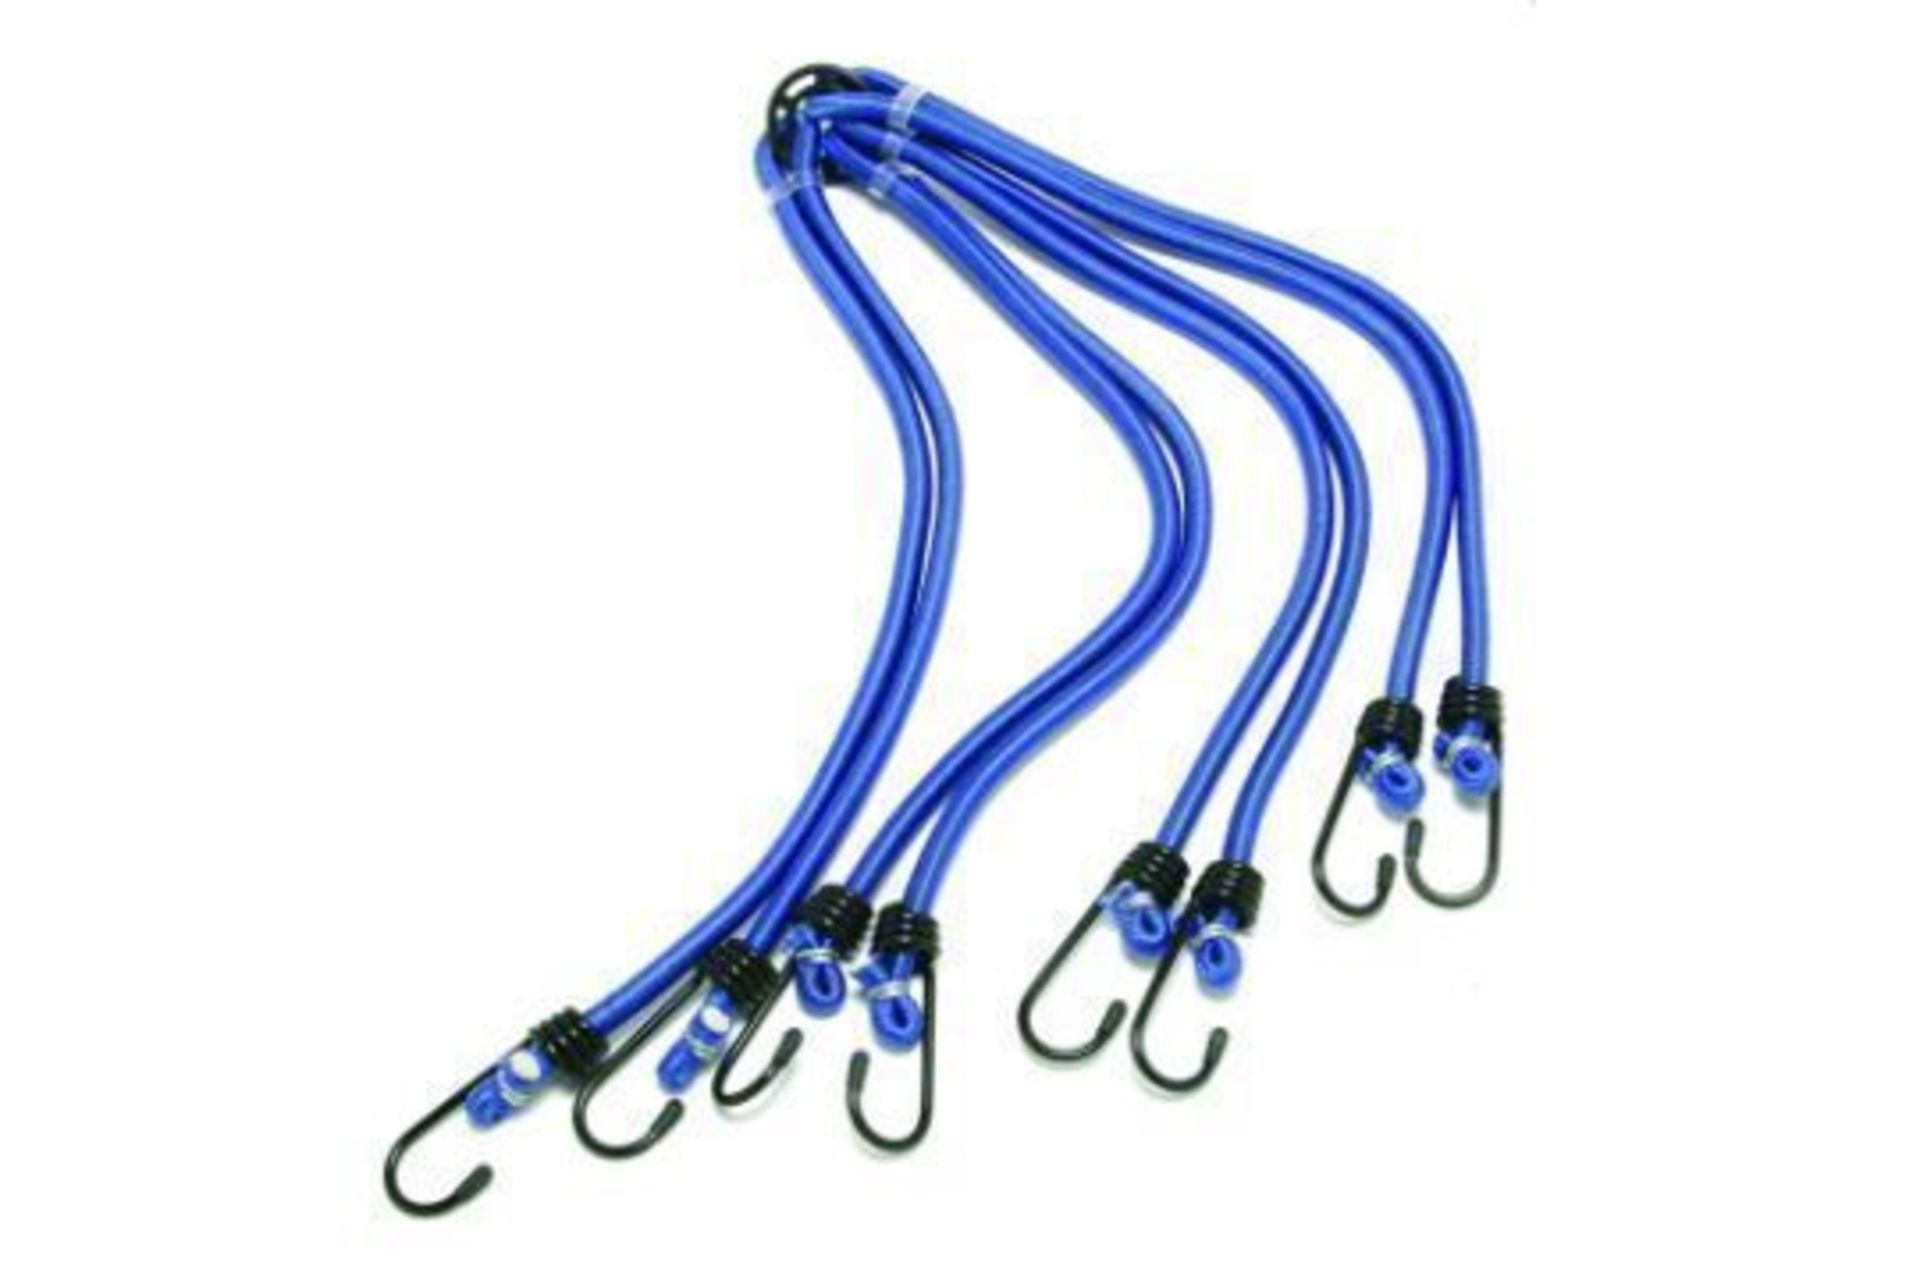 New Pack of Hilka 8 Spider Blue Luggage Bungee Straps, 8 mm